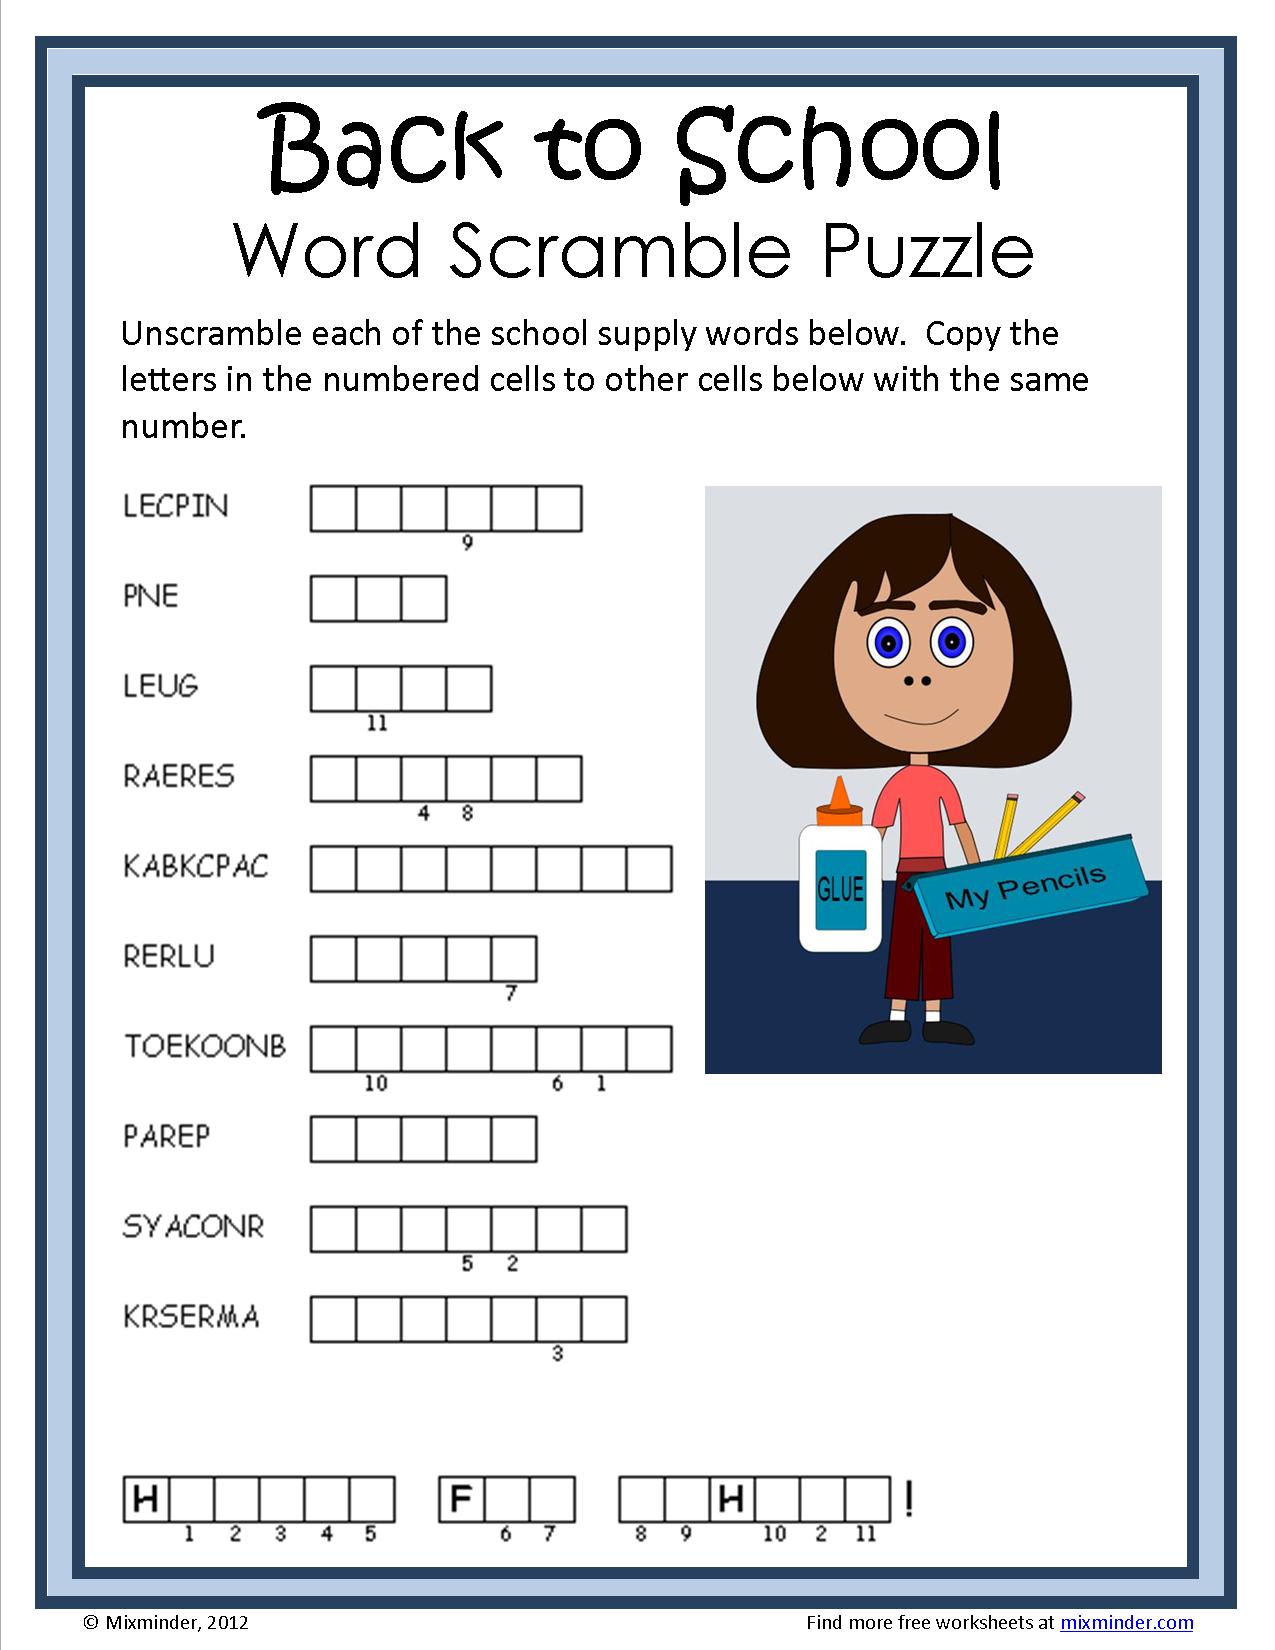 Back to School Word Scramble Puzzle